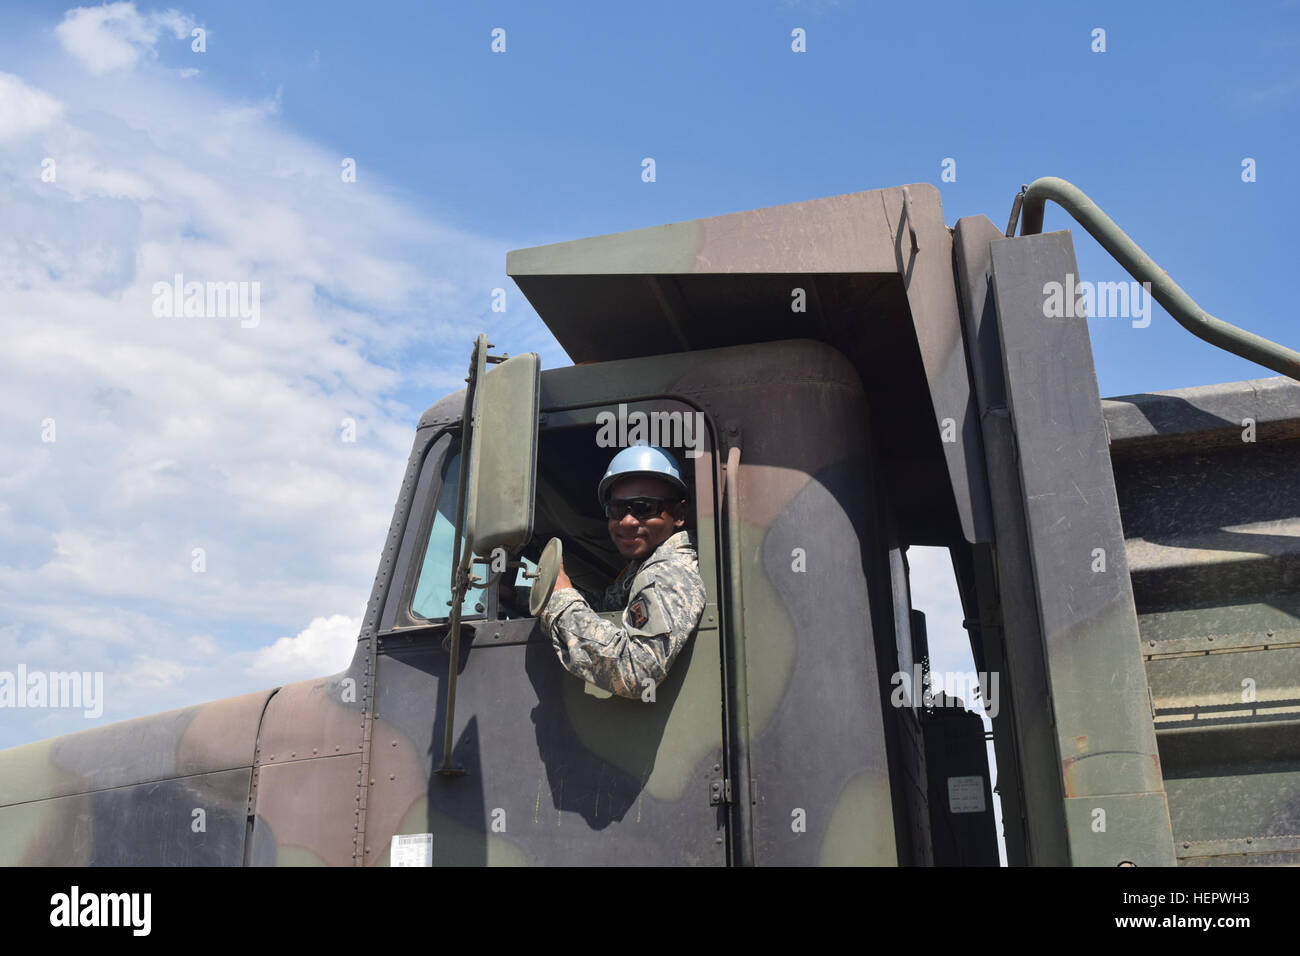 Specialist Kentona Shipp, an engineer with the 858th Horizontal Engineer Company, 223rd Engineer Battalion, 168th Engineer Brigade, Mississippi Army National Guard moves construction material with a dump truck on June 12, 2016 during Operation Resolute Castle at Novo Selo Training Area, Bulgaria.  Once complete, the ammunition holding area will allow larger units to conduct training operations in Bulgaria.  During Resolute Castle, Engineer Brigades from both the Mississippi and Tennessee Army National Guard are teaming up to improve military infrastructure in Bulgaria as part of United States  Stock Photo